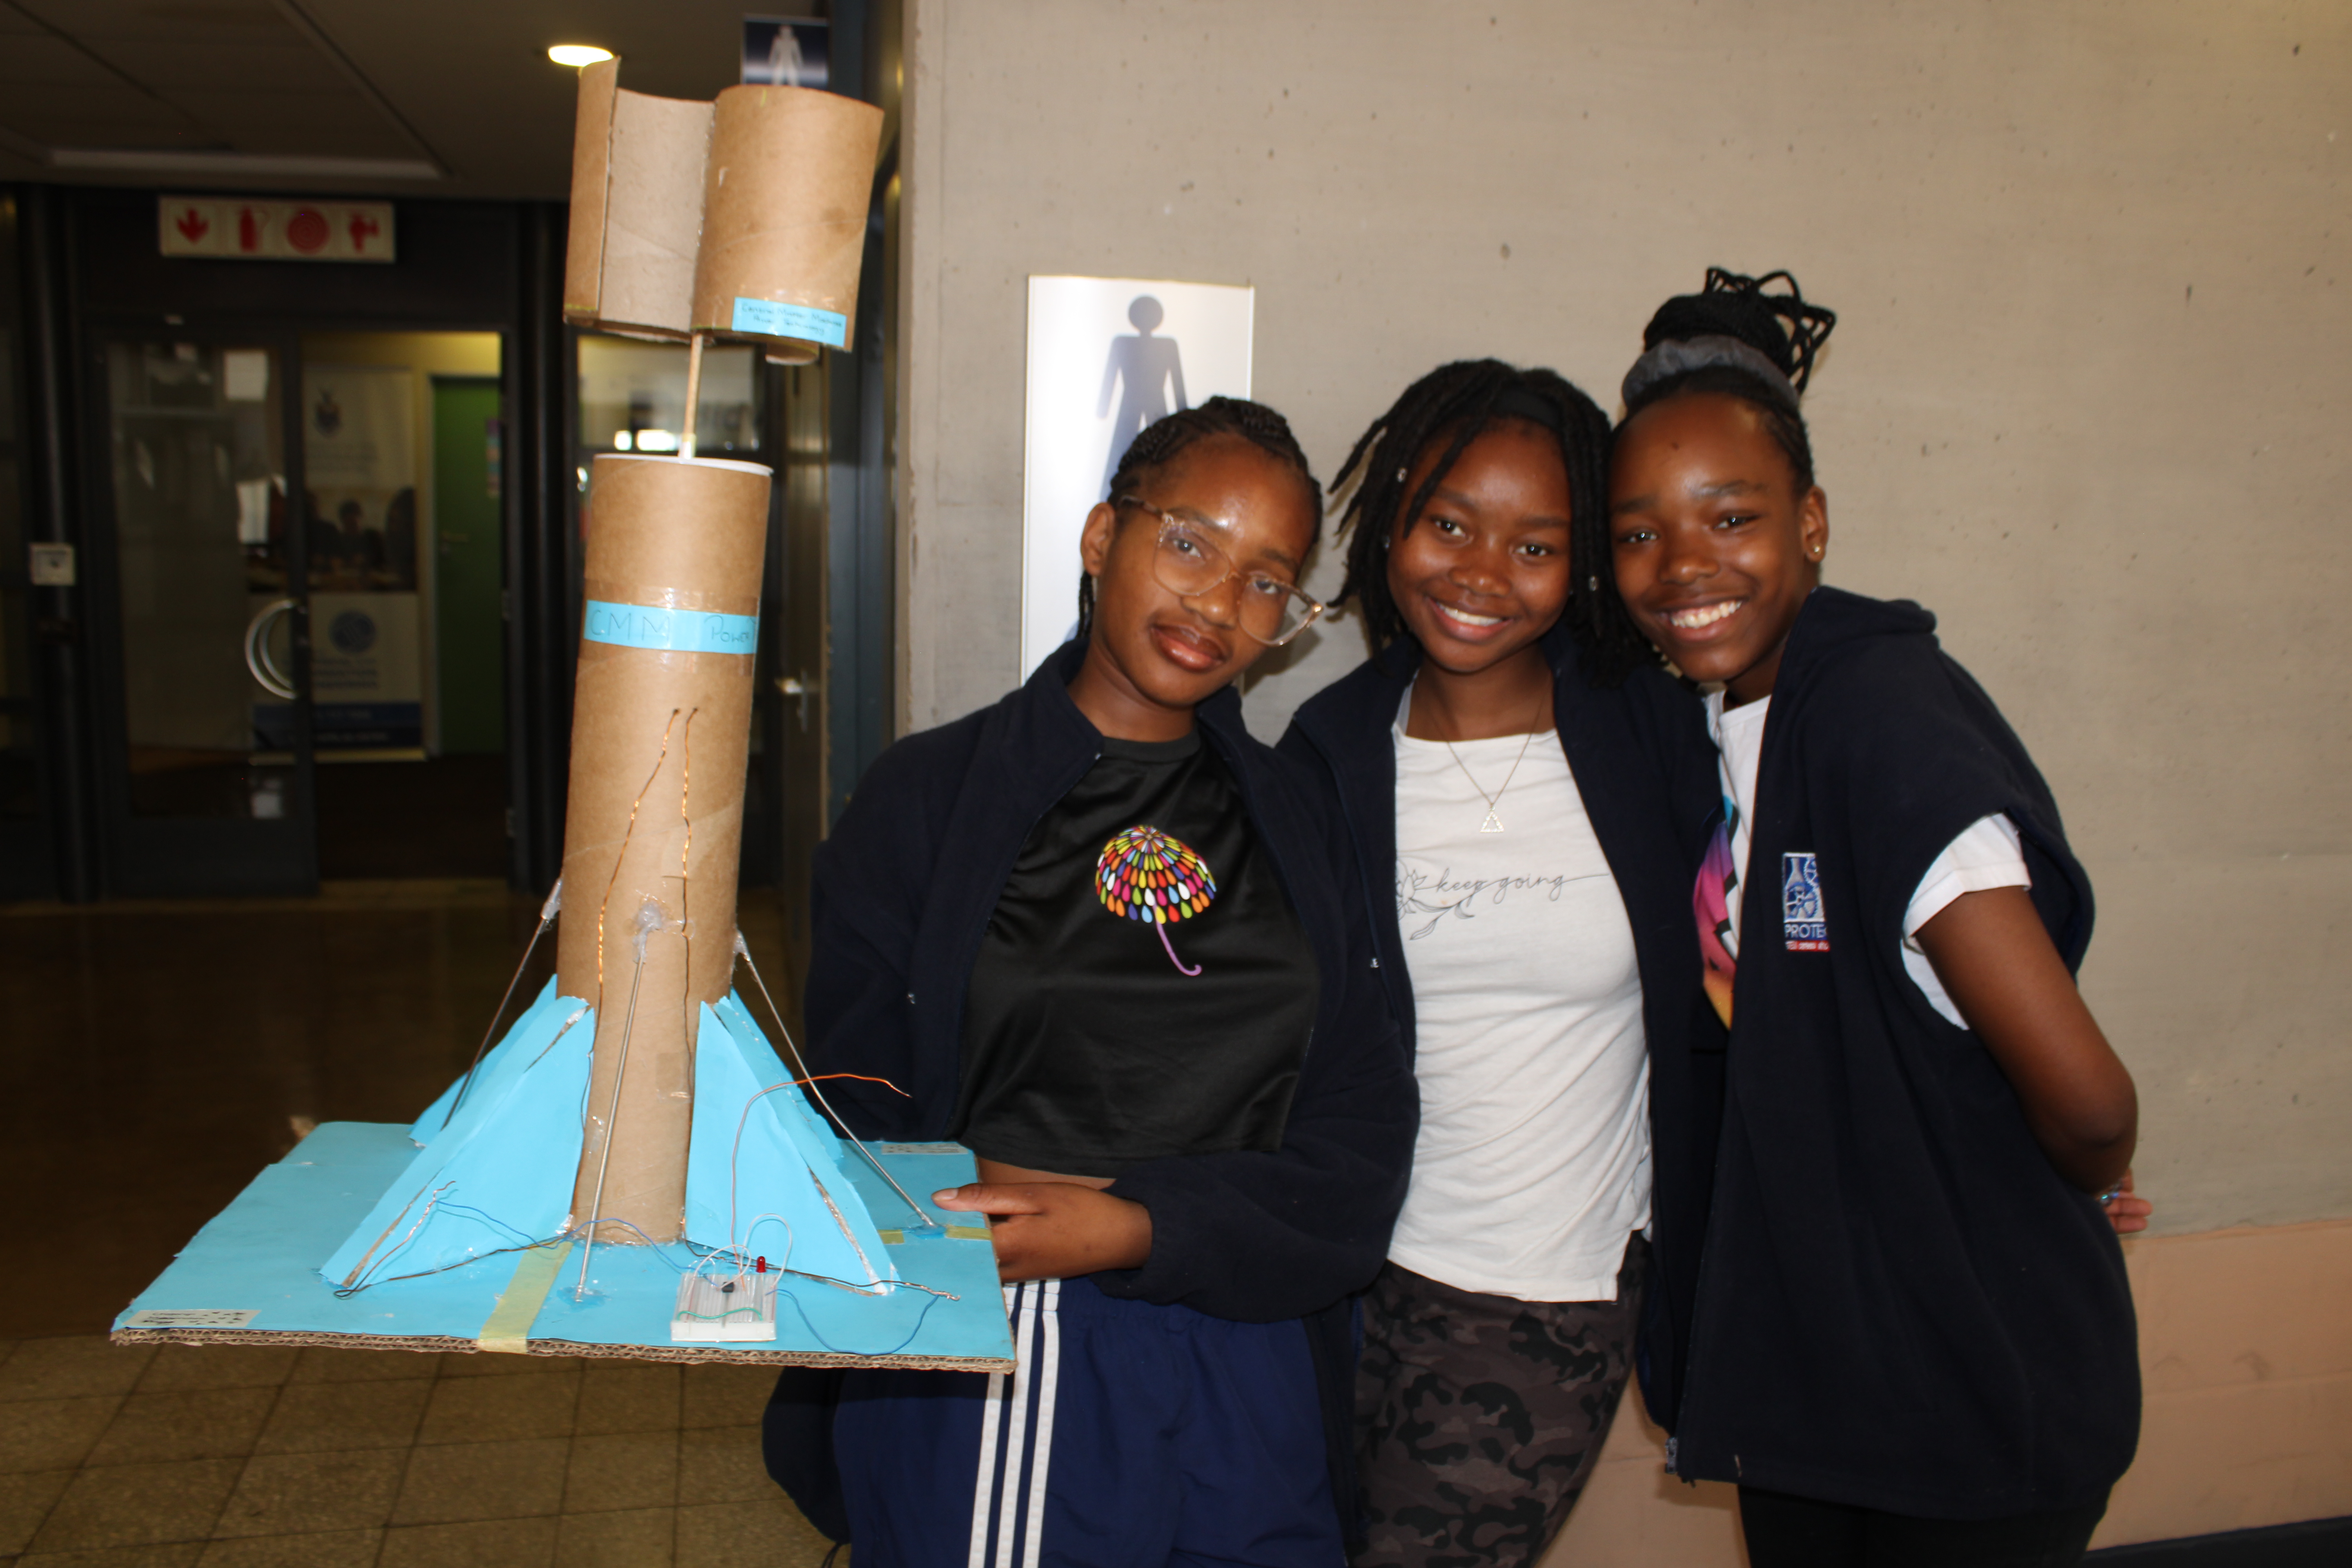 Learners carrying their Design Project